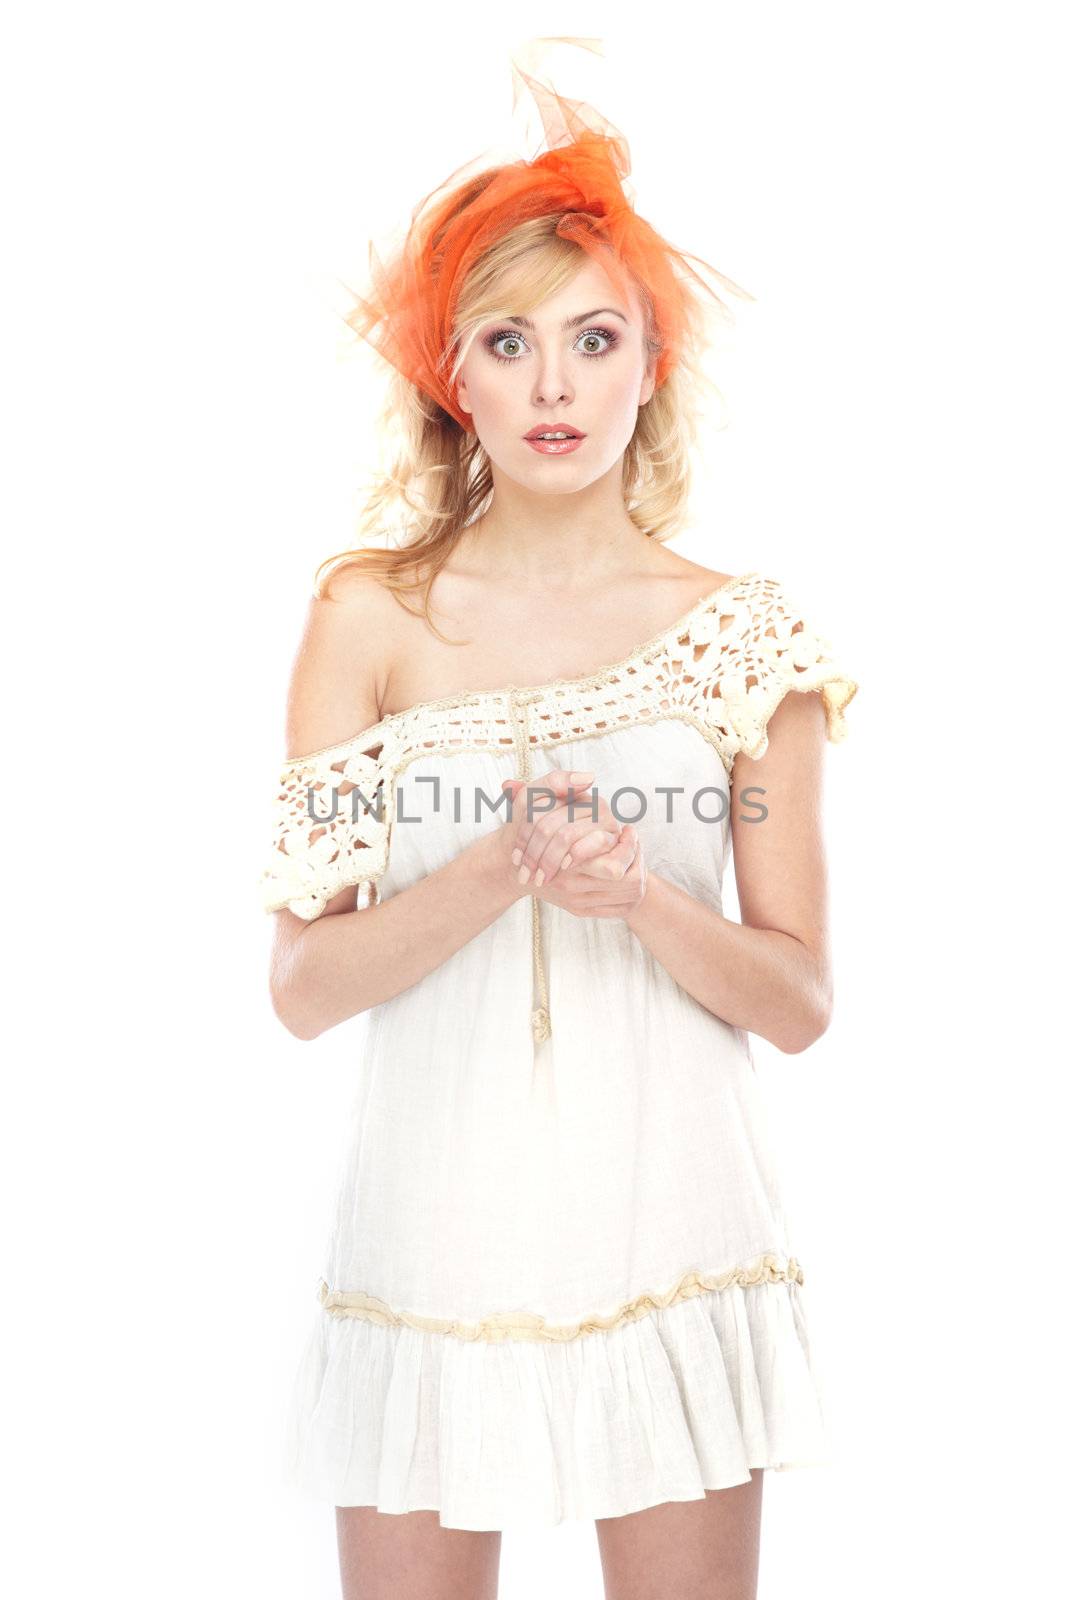 Woman expressing astonishment and surprise on a white background